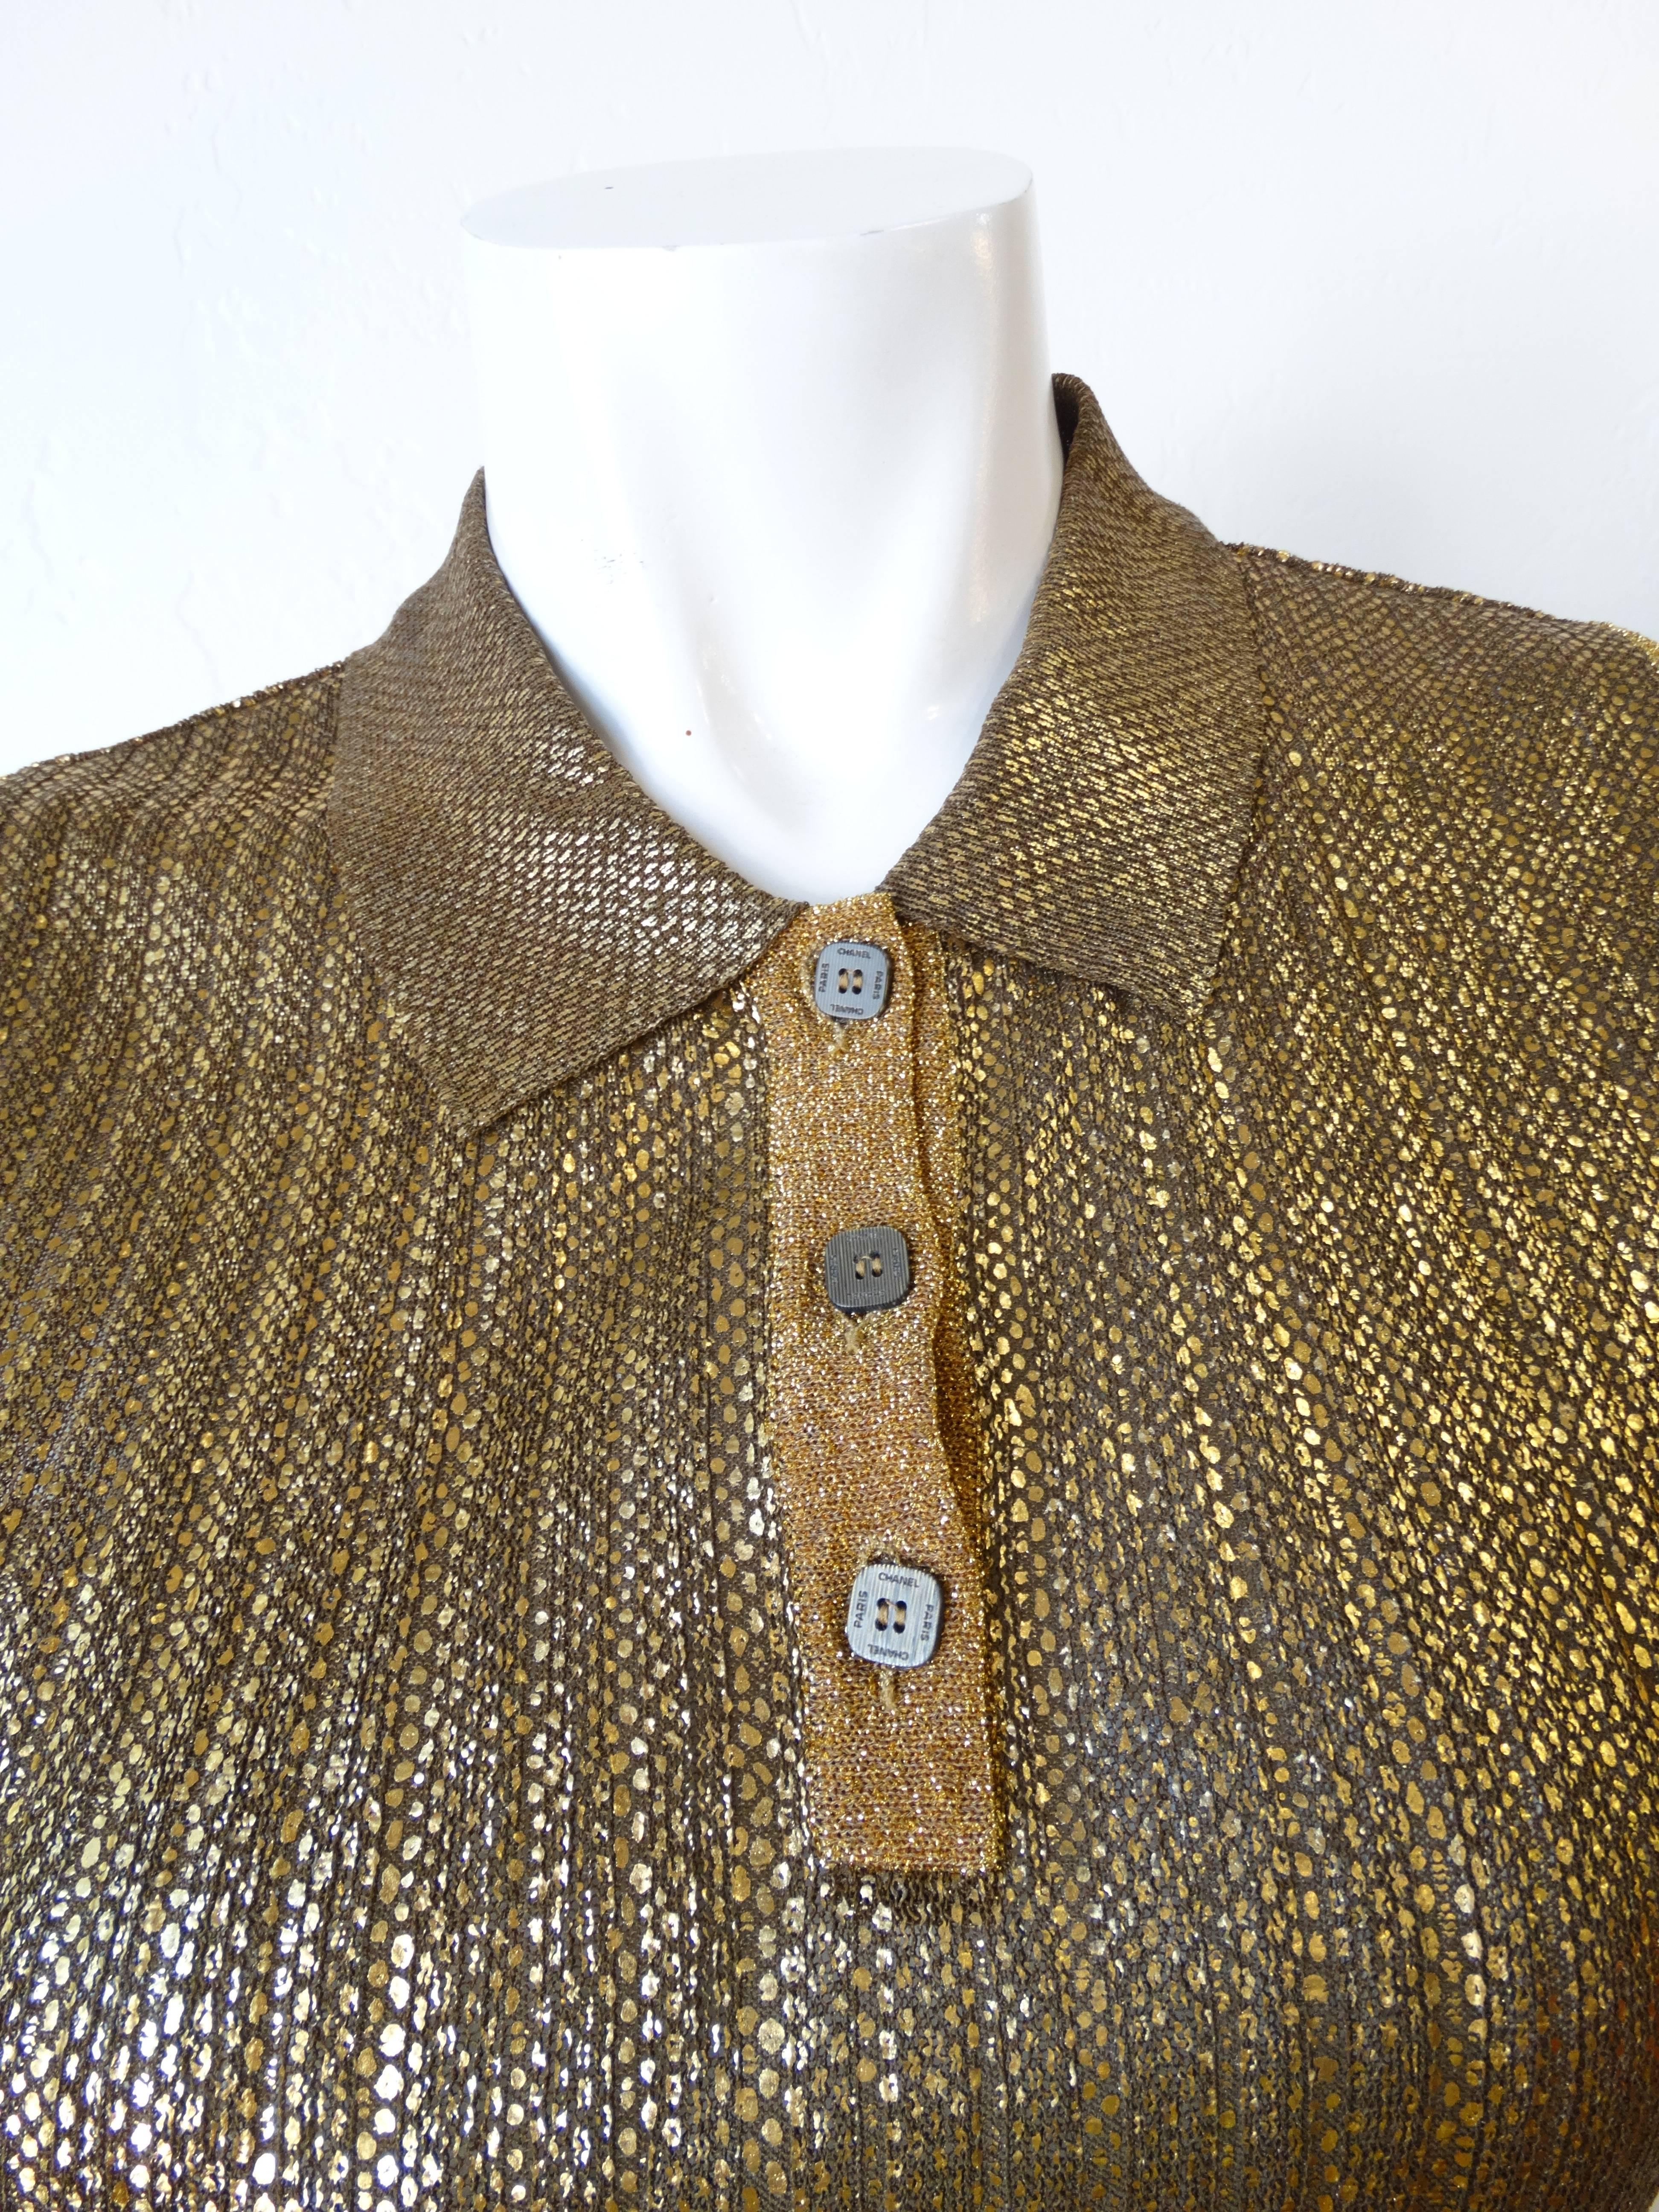 Super chic and shiny Chanel polo circa the 2000s! Knit semi-sheer fabric with gold and silver toned coating in a snakeskin like pattern. Gold lame knit trim beneath the buttons and along the arm holes. Three square buttons up the neckline with